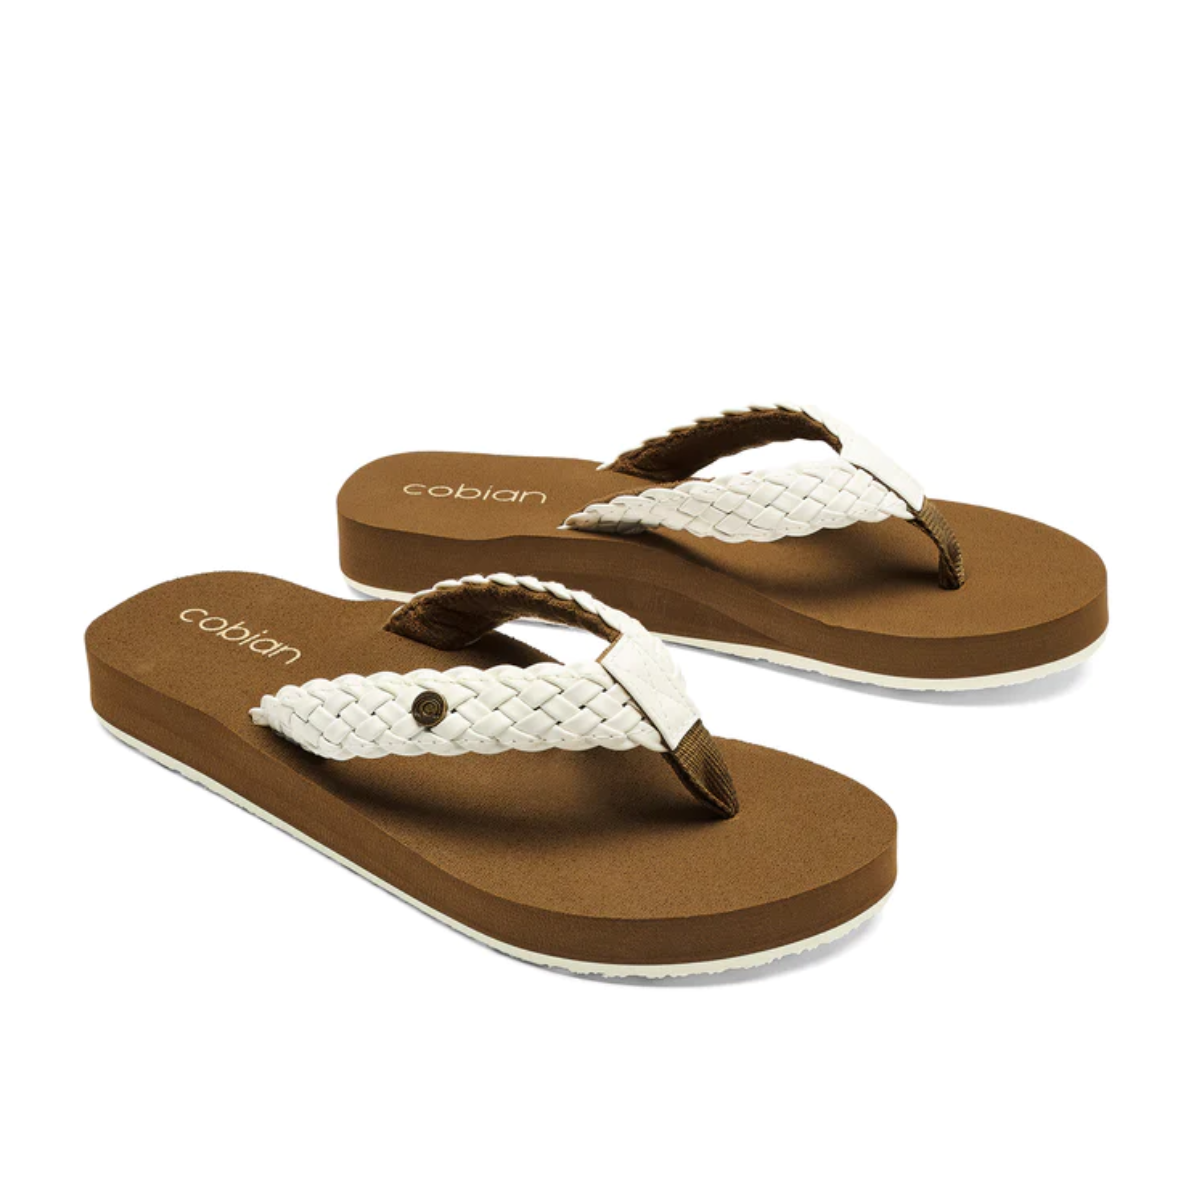 A pair of COBAIN BRAIDED BOUNCE WHITE women's flip flops by COBIAN featuring a synthetic leather strap for added comfort and a touch of style.